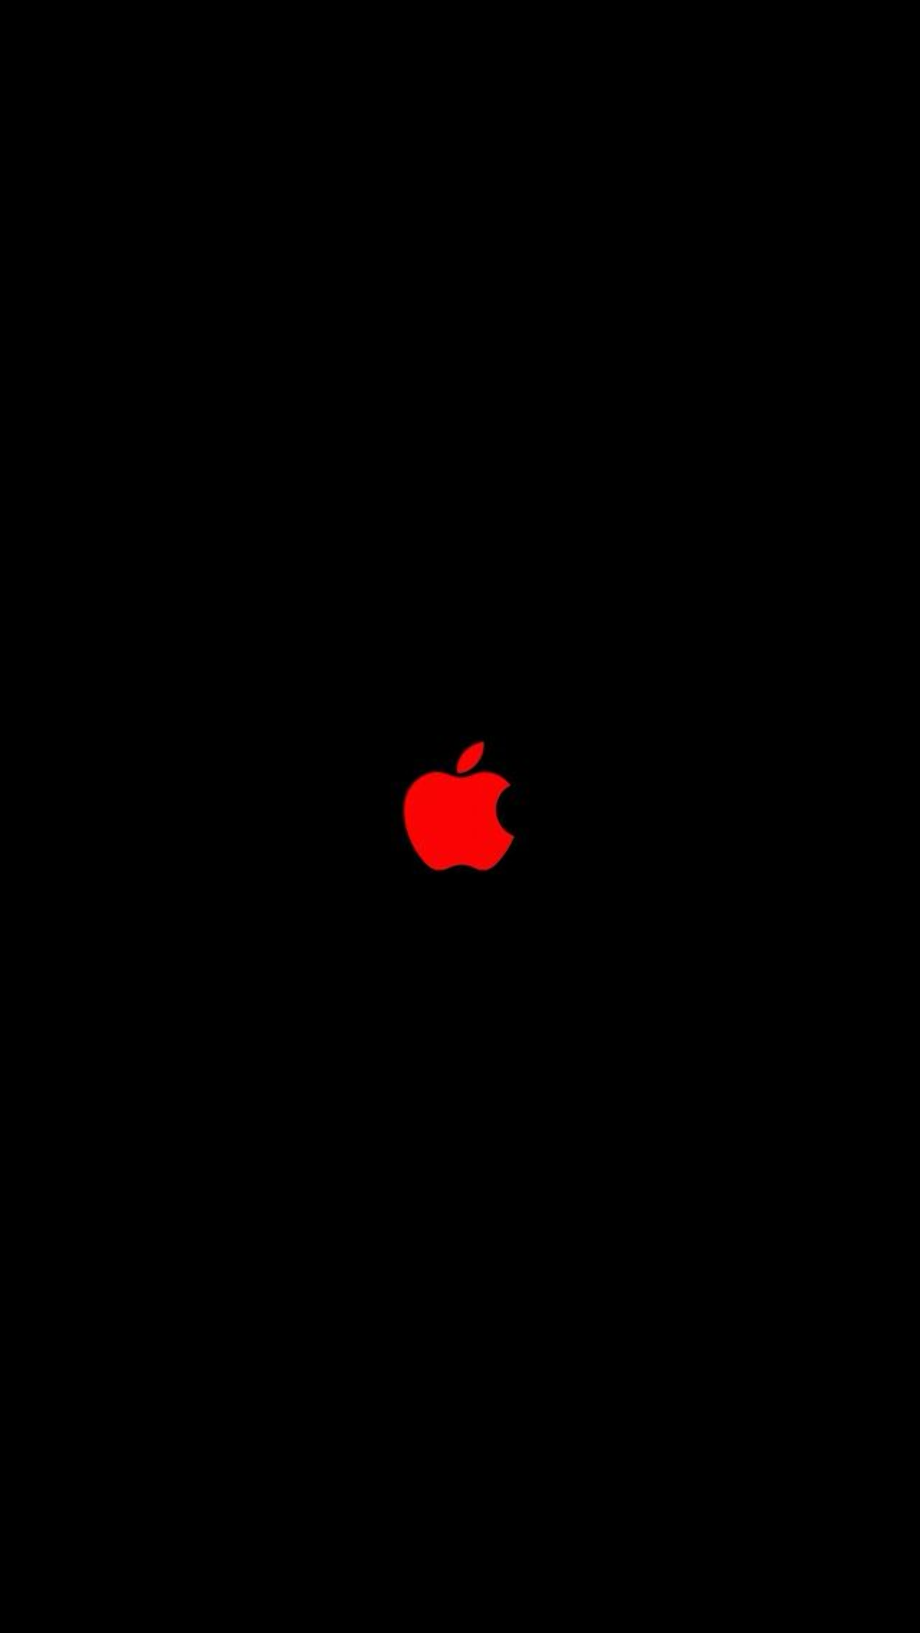 iphone logo red